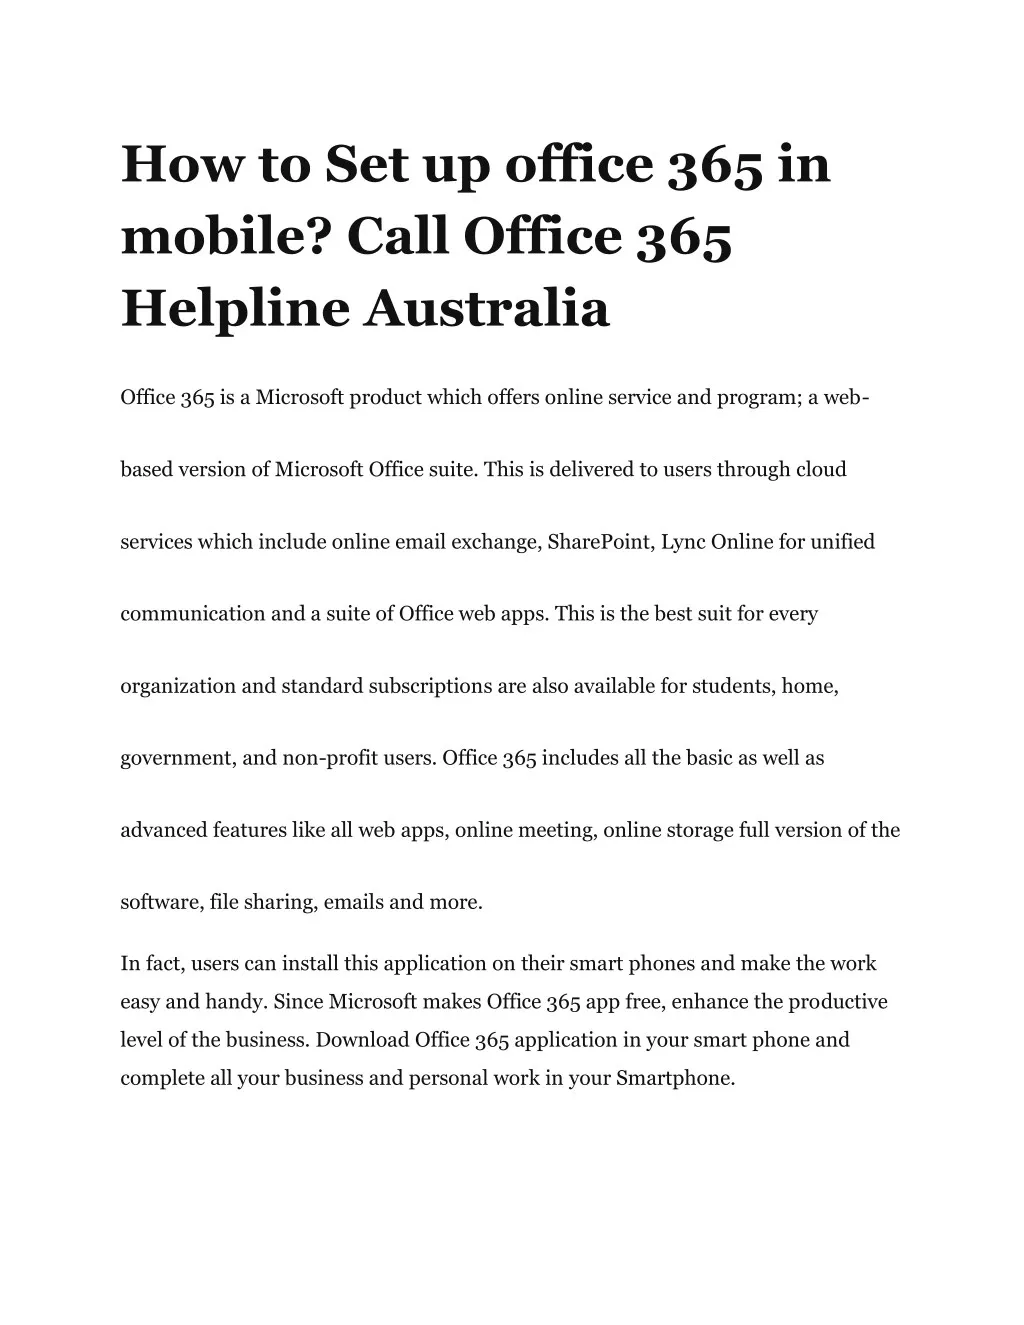 how to set up office 365 in mobile call office